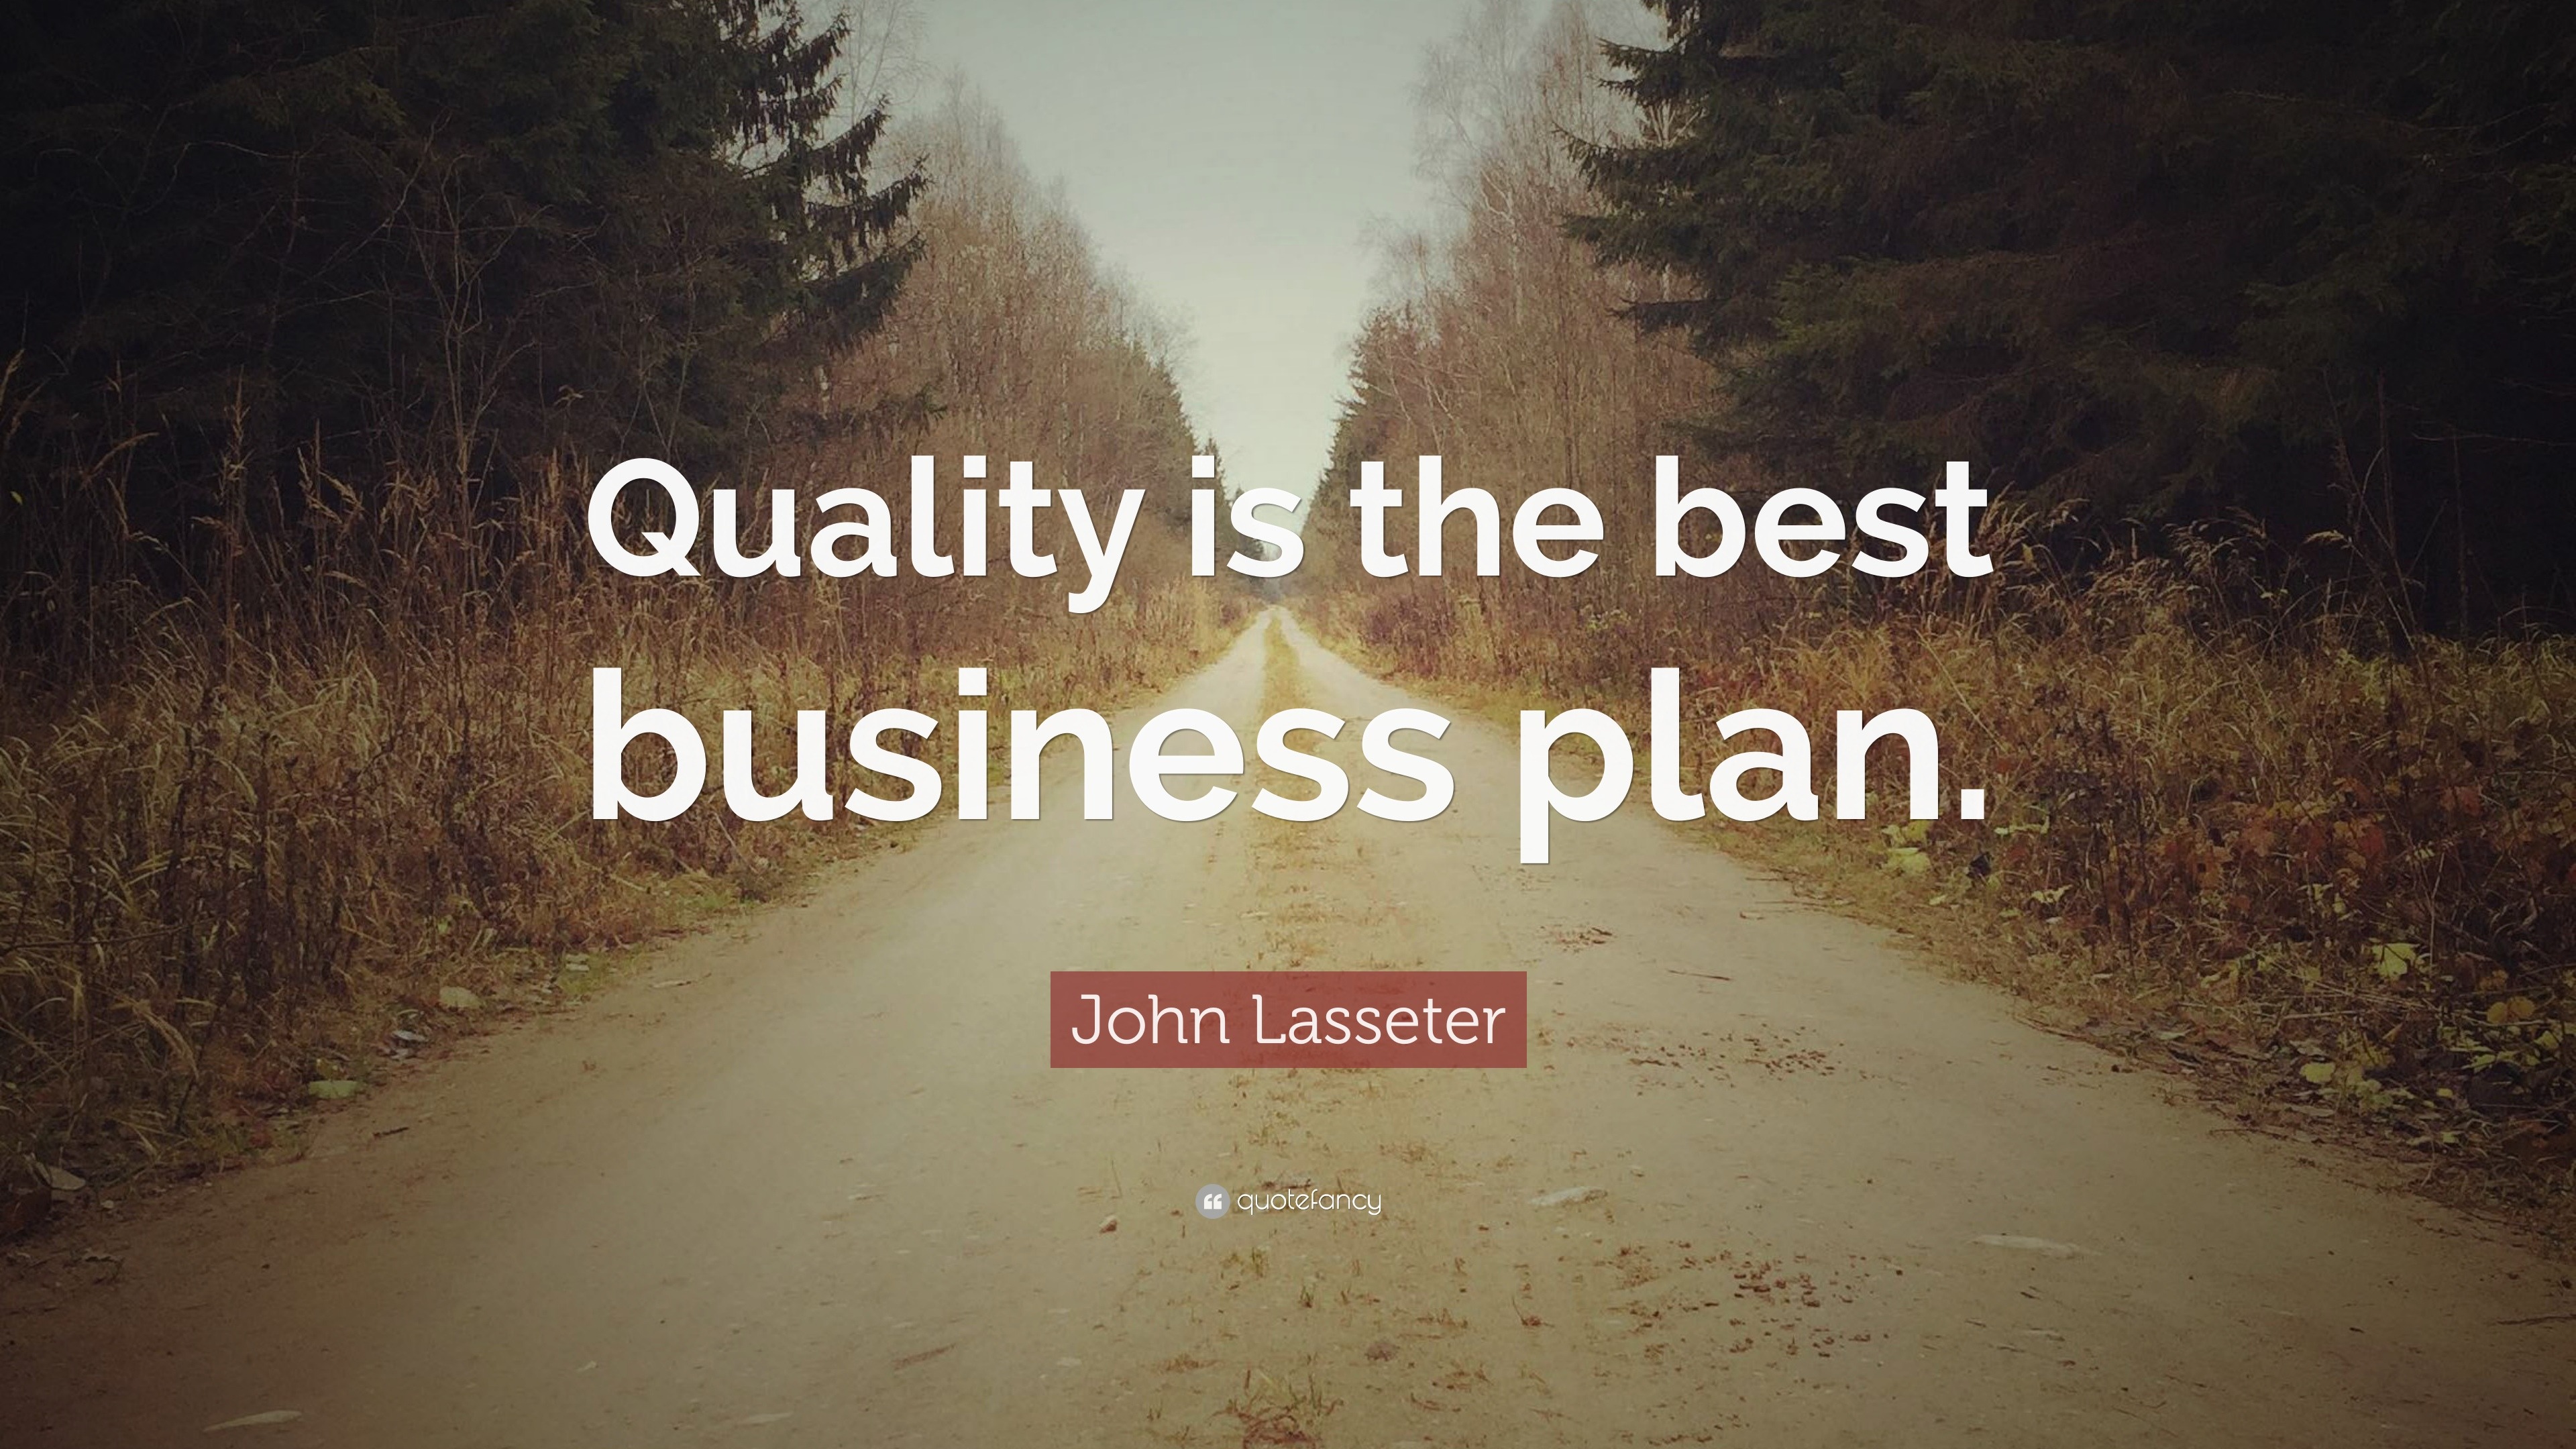 quote for business plan